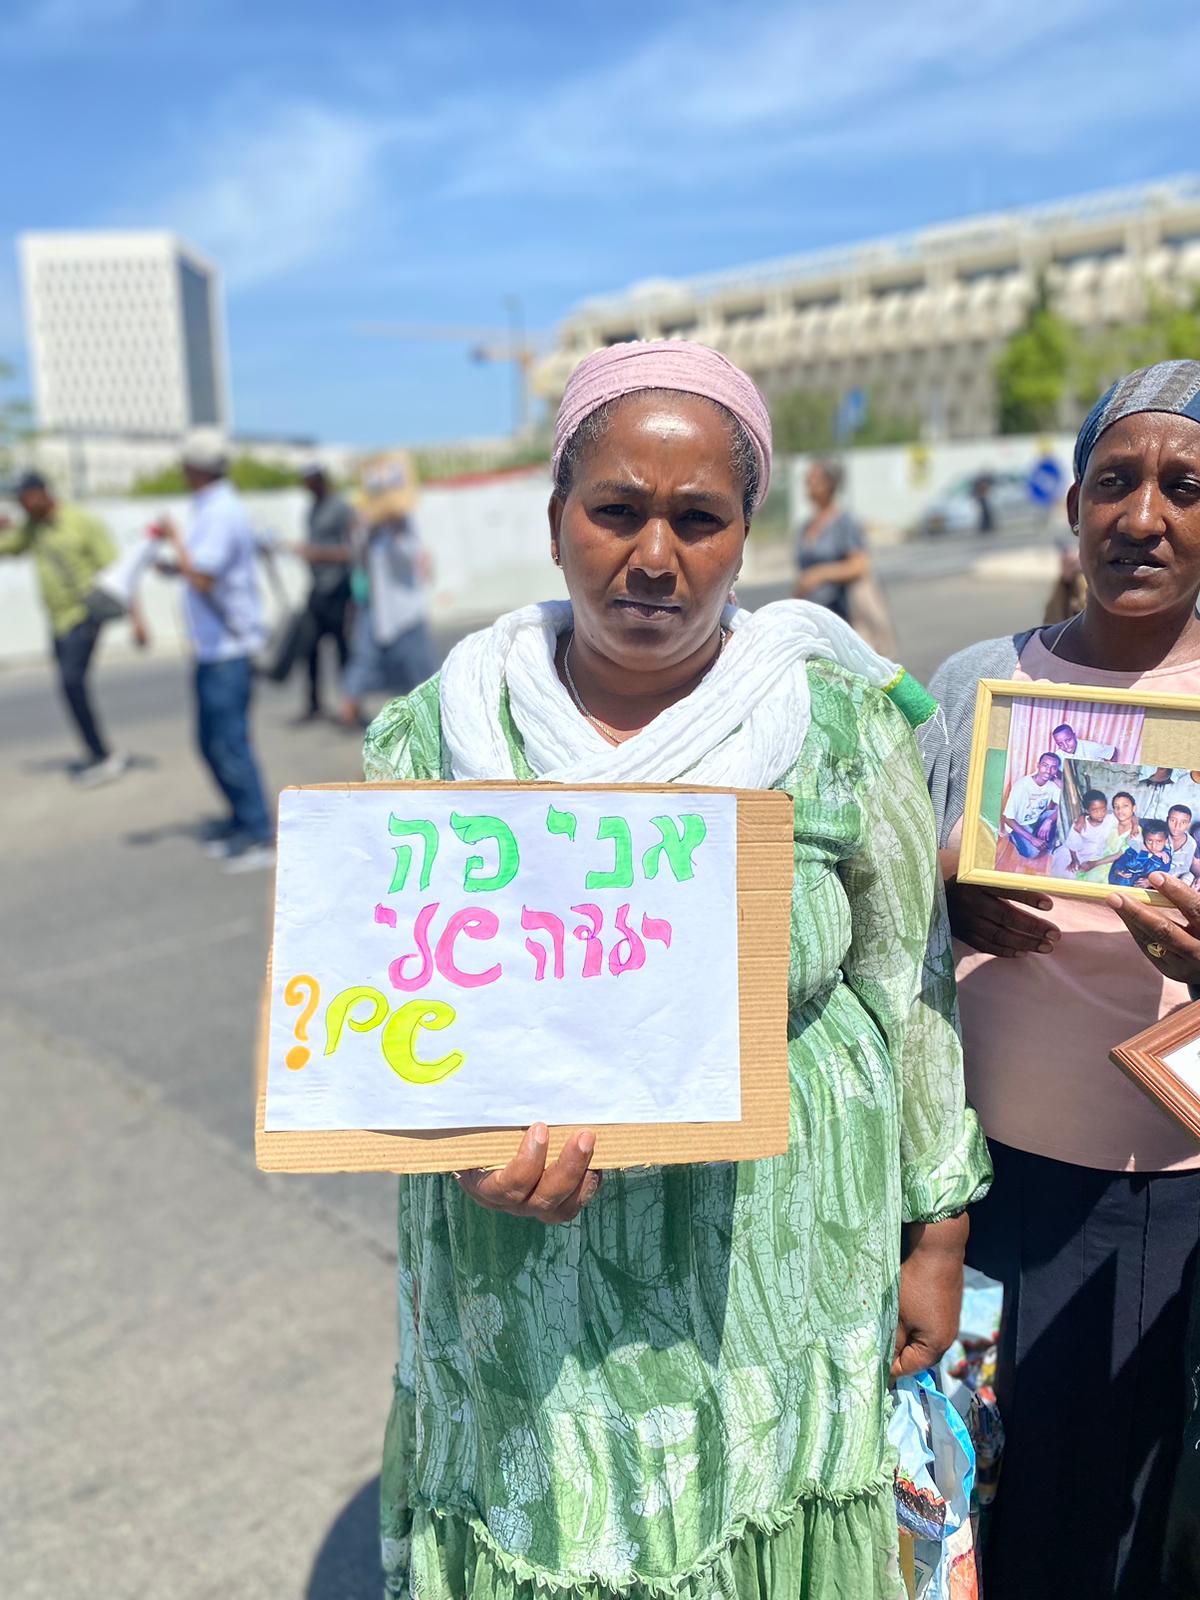 Yardao, a recent olah from Ethiopia, holds a sign saying: “I’m here, my daughter’s there?” (Photo: Yahel Faraj).